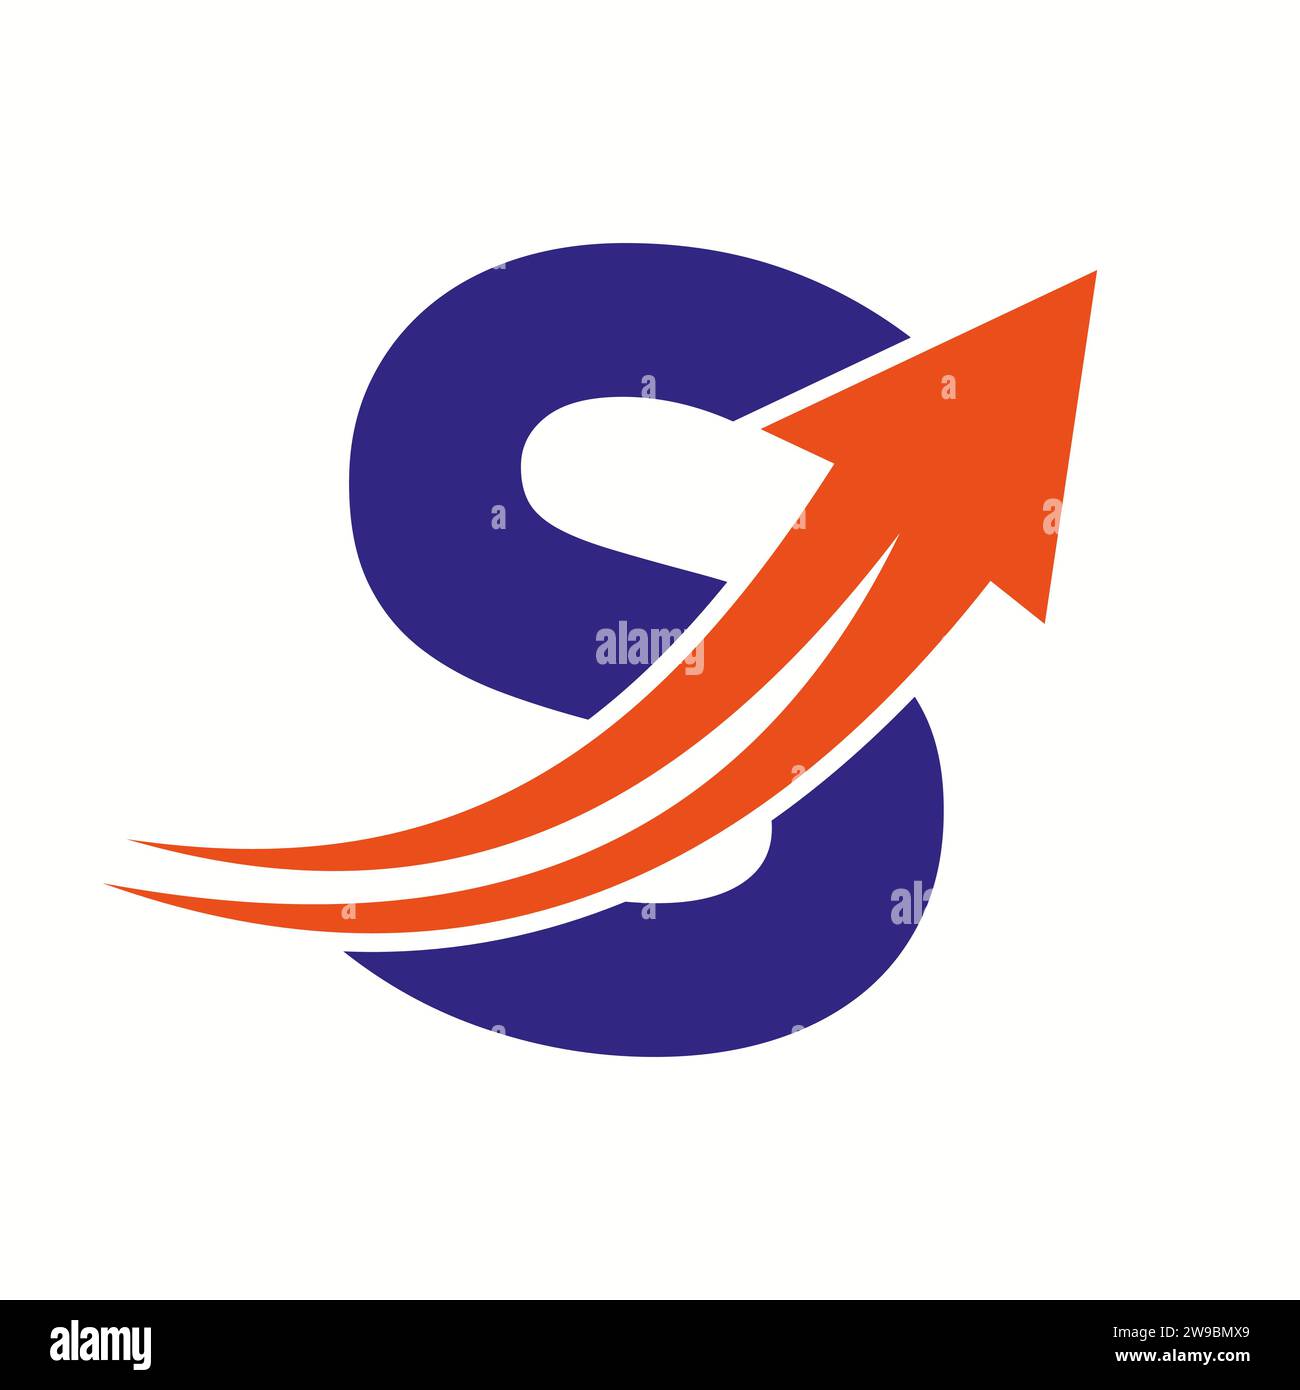 Financial Logo On Letter S Concept With Growth Arrow Icon Stock Vector